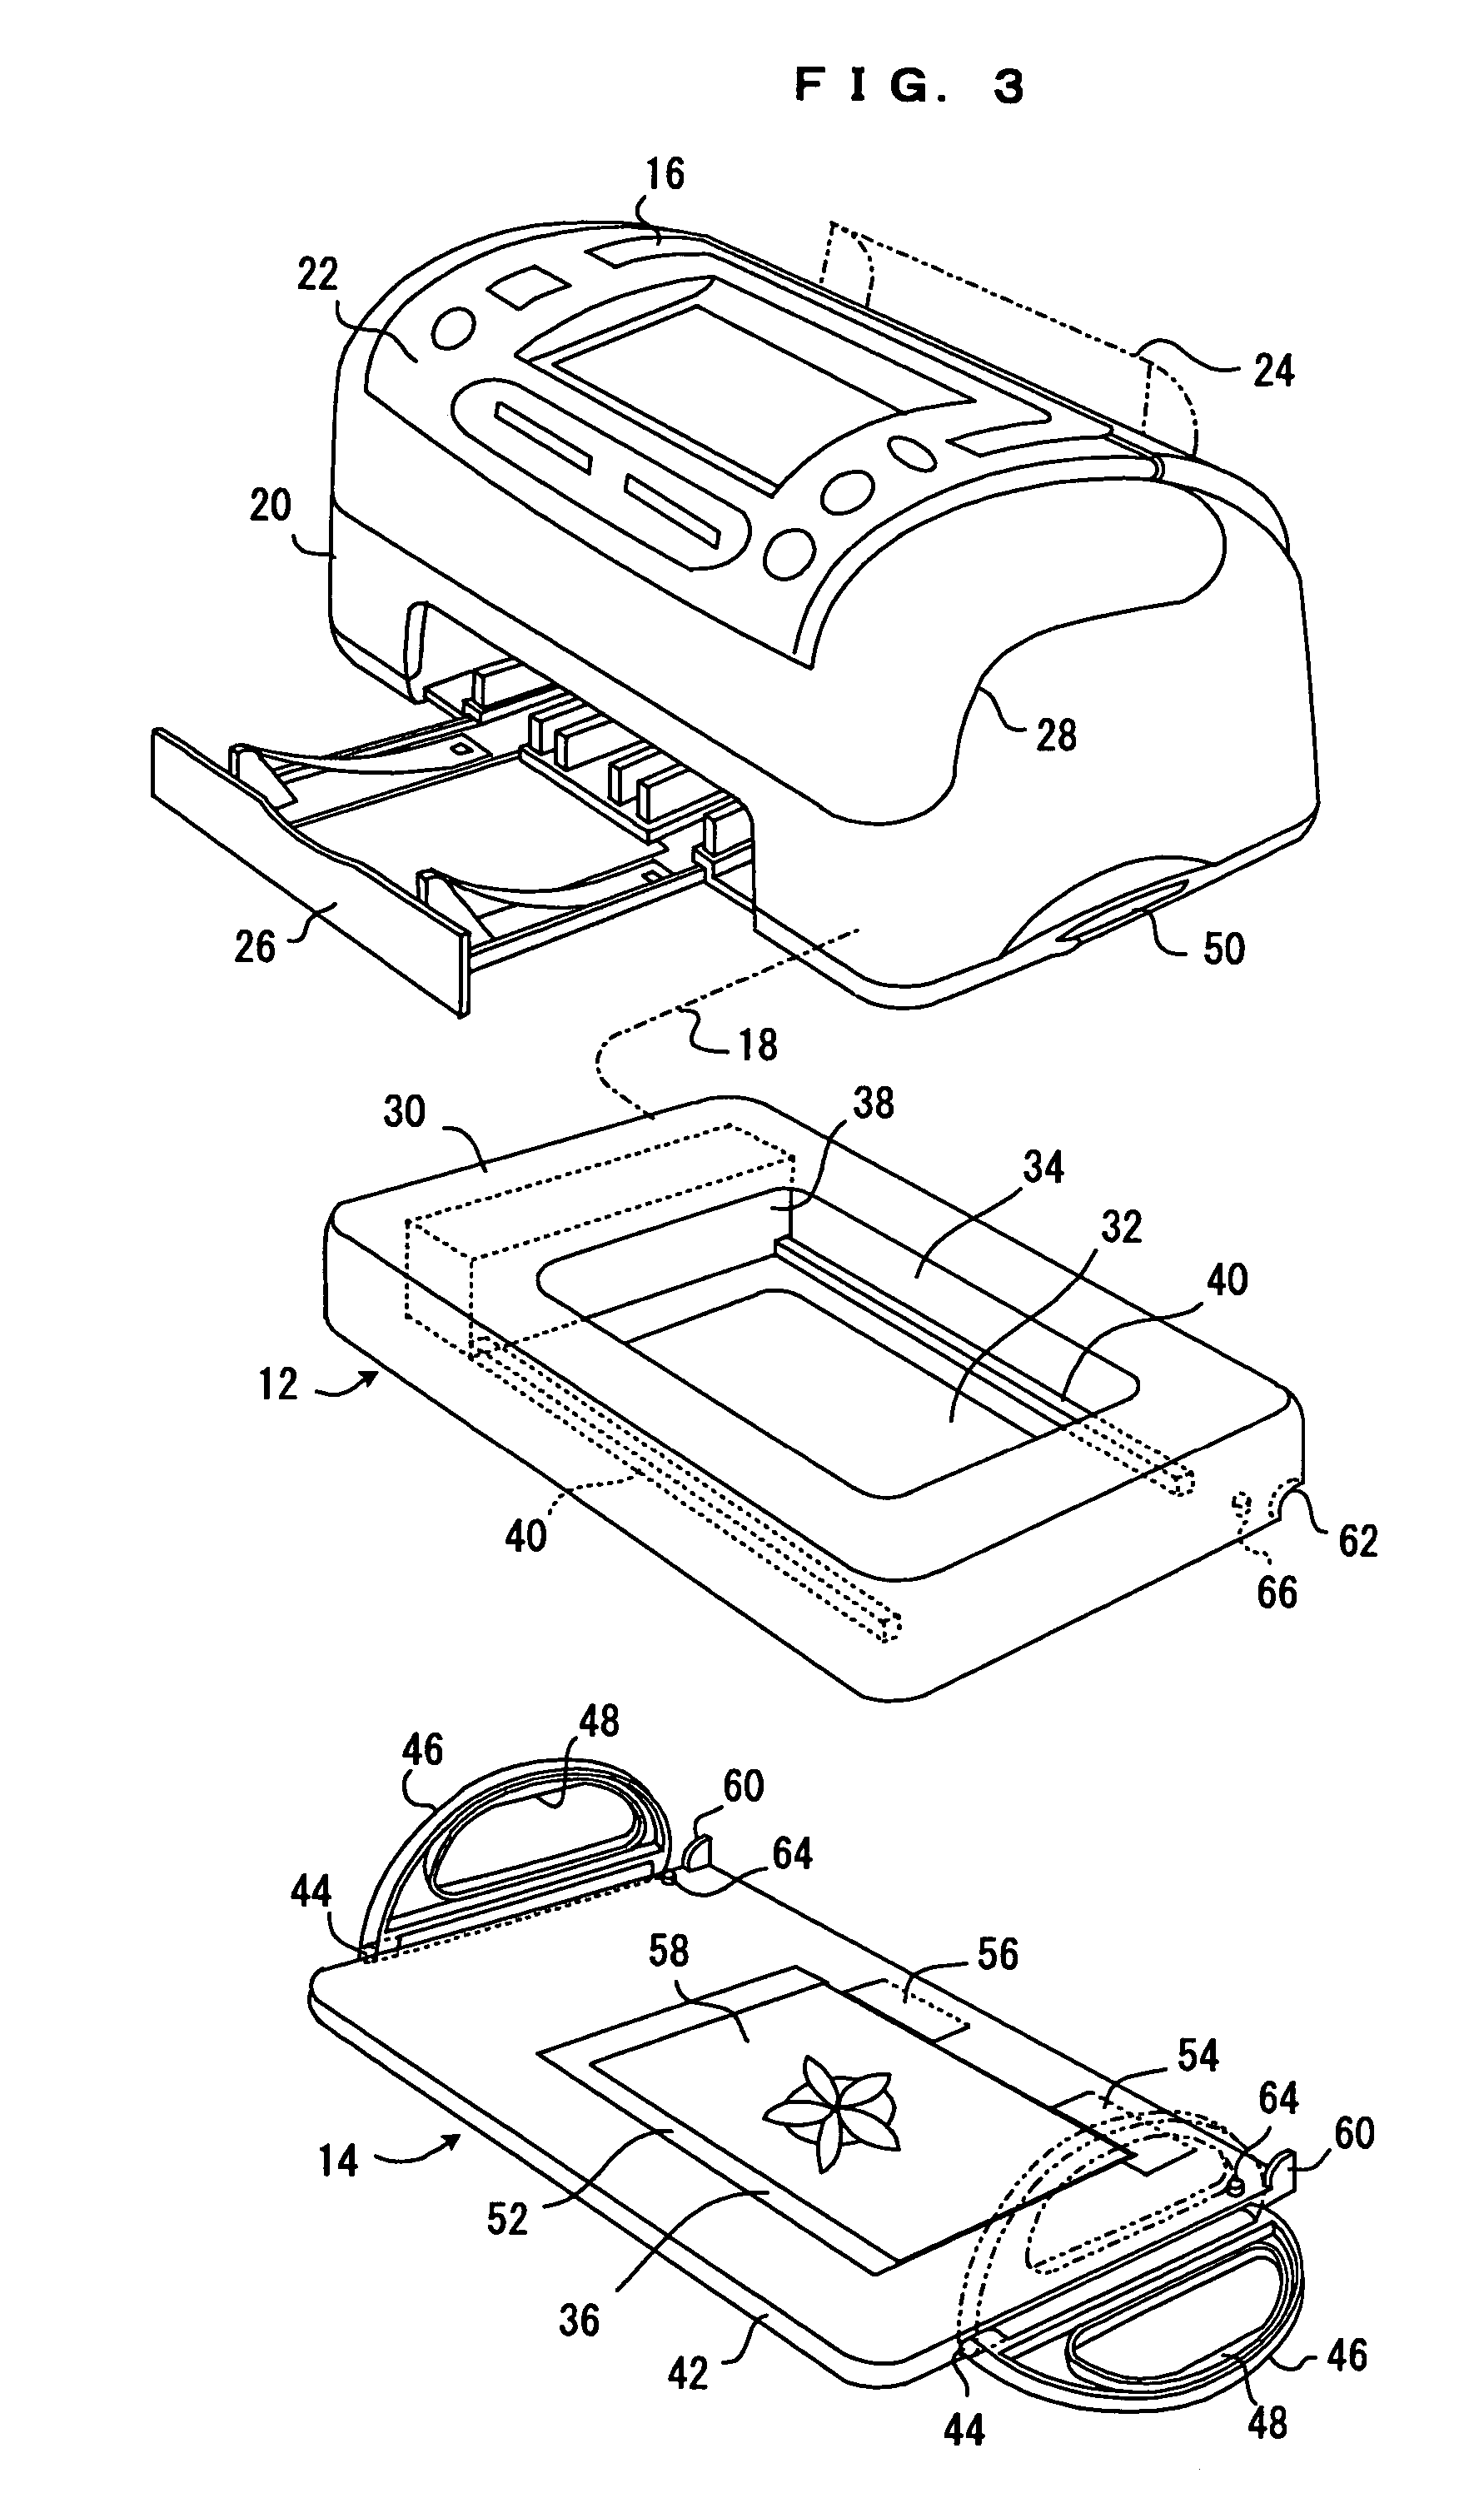 Post card making device